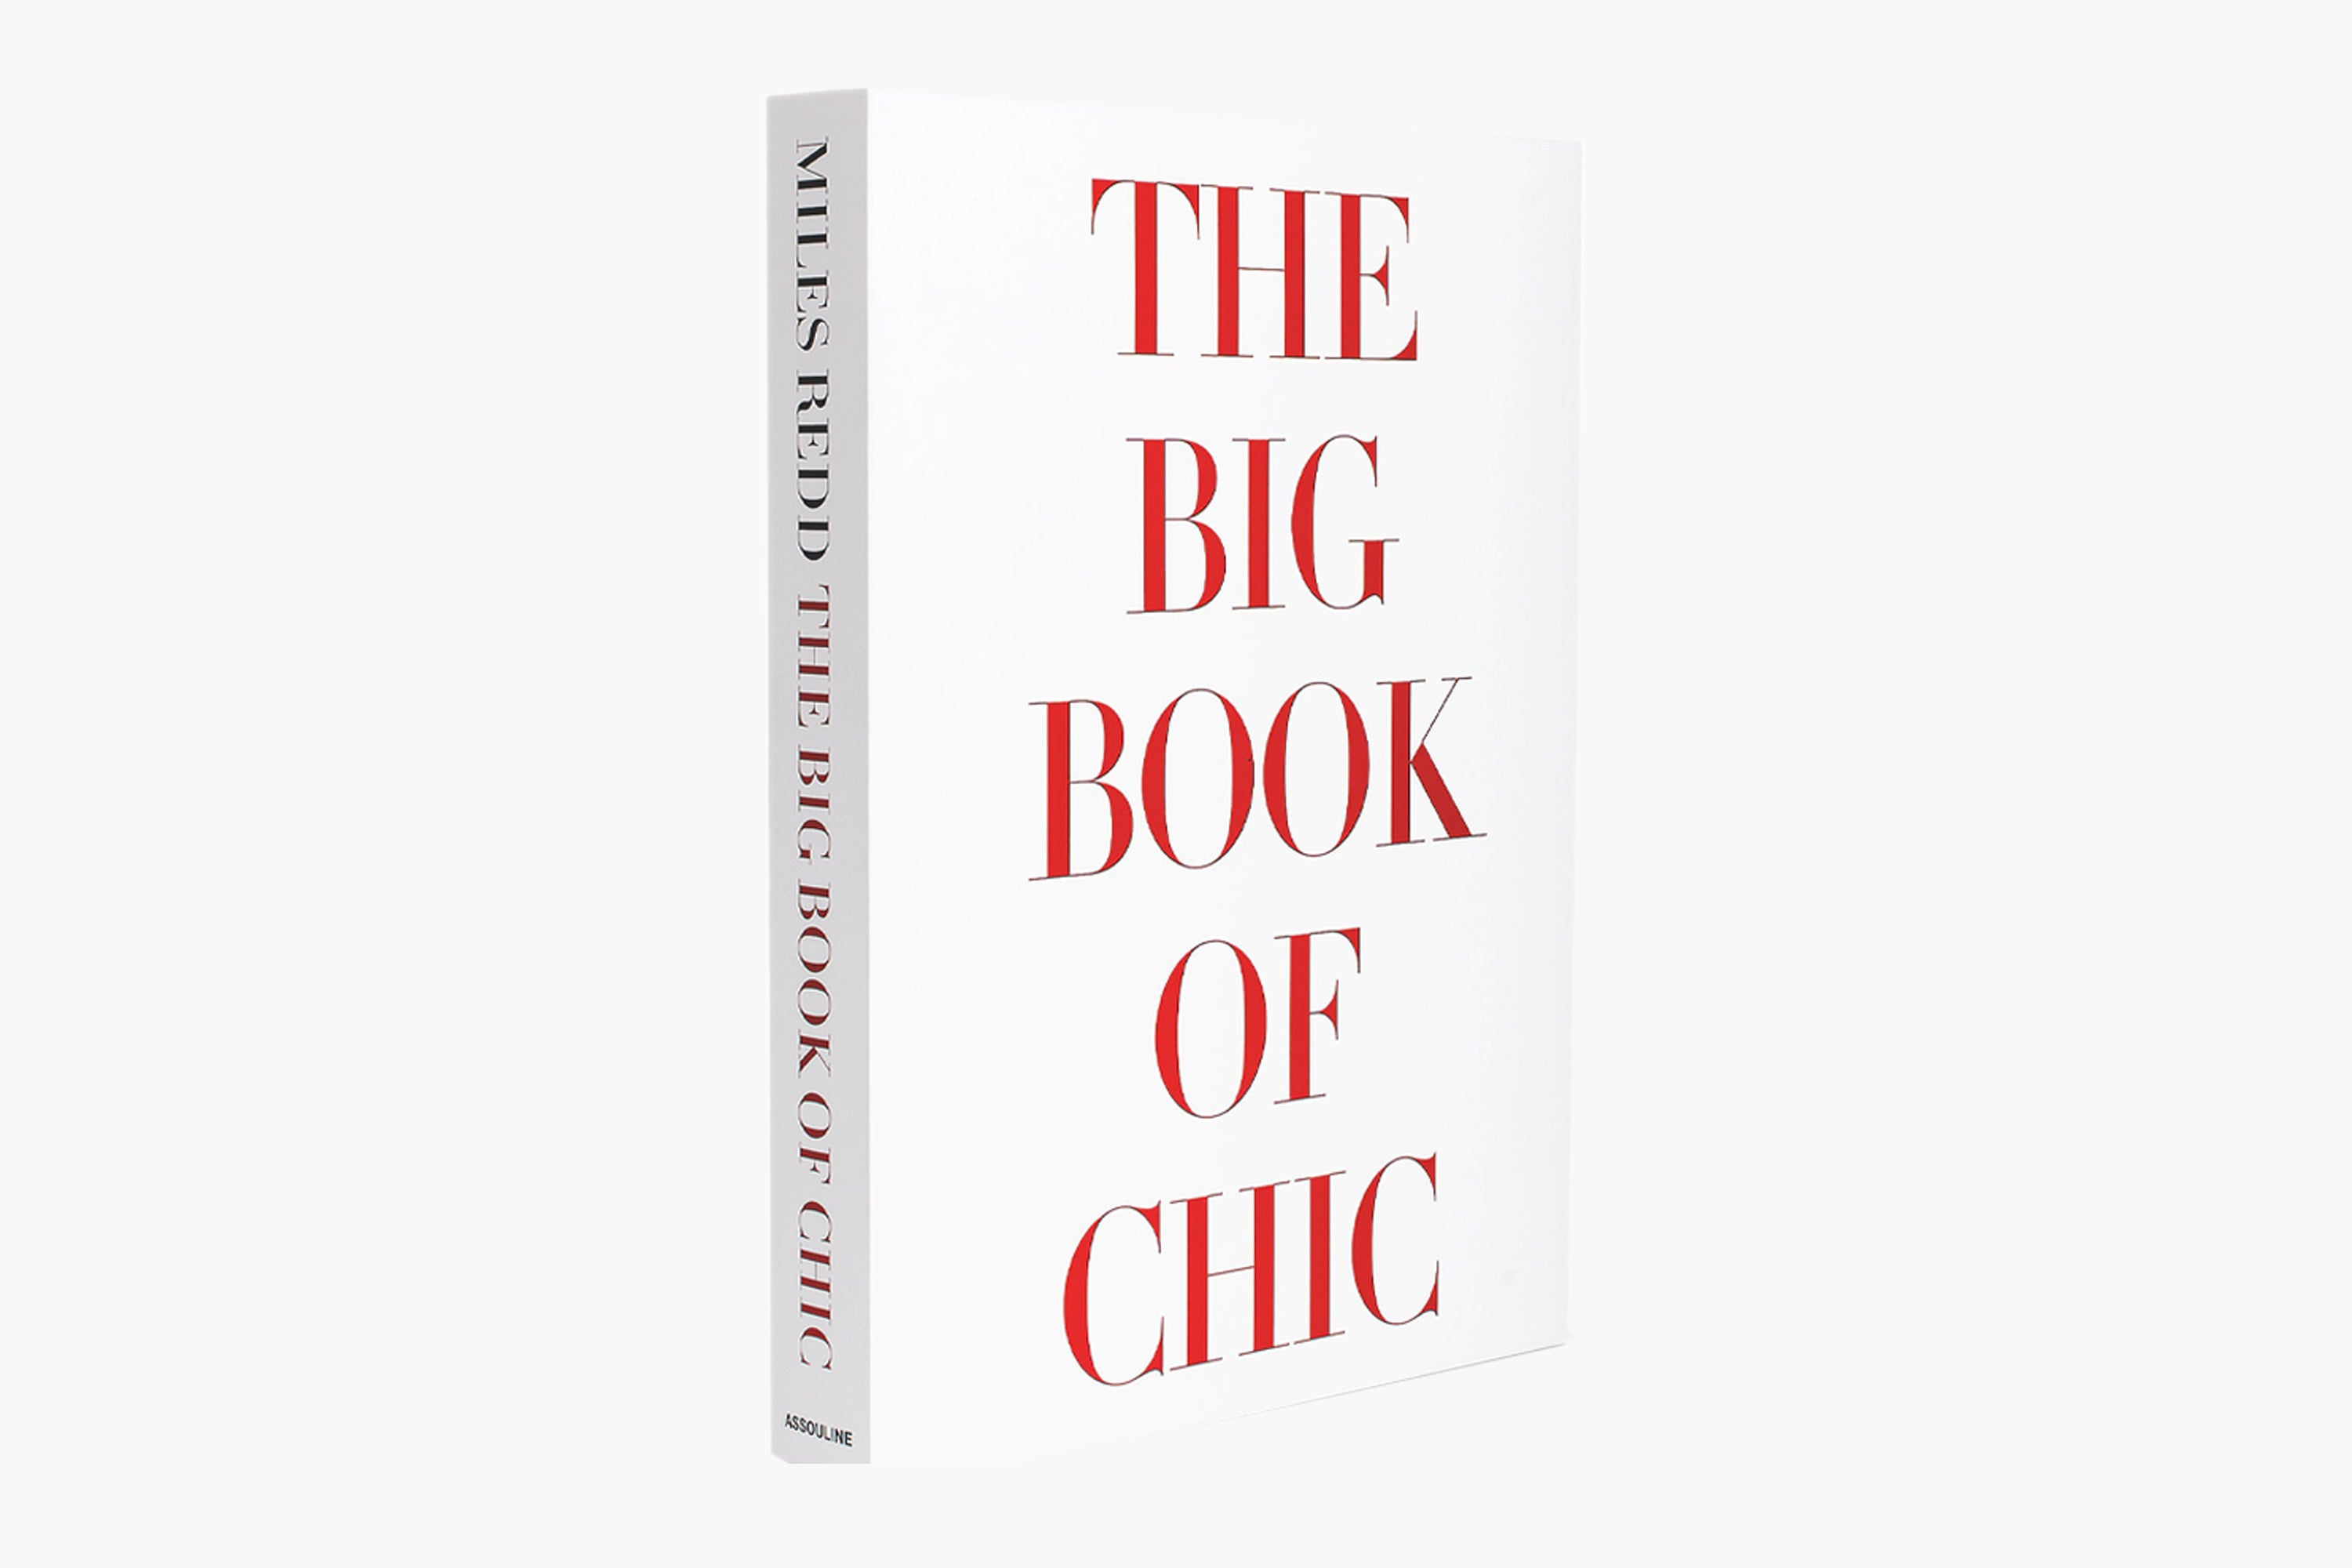 The Big Book of Chic - thumbnail 3